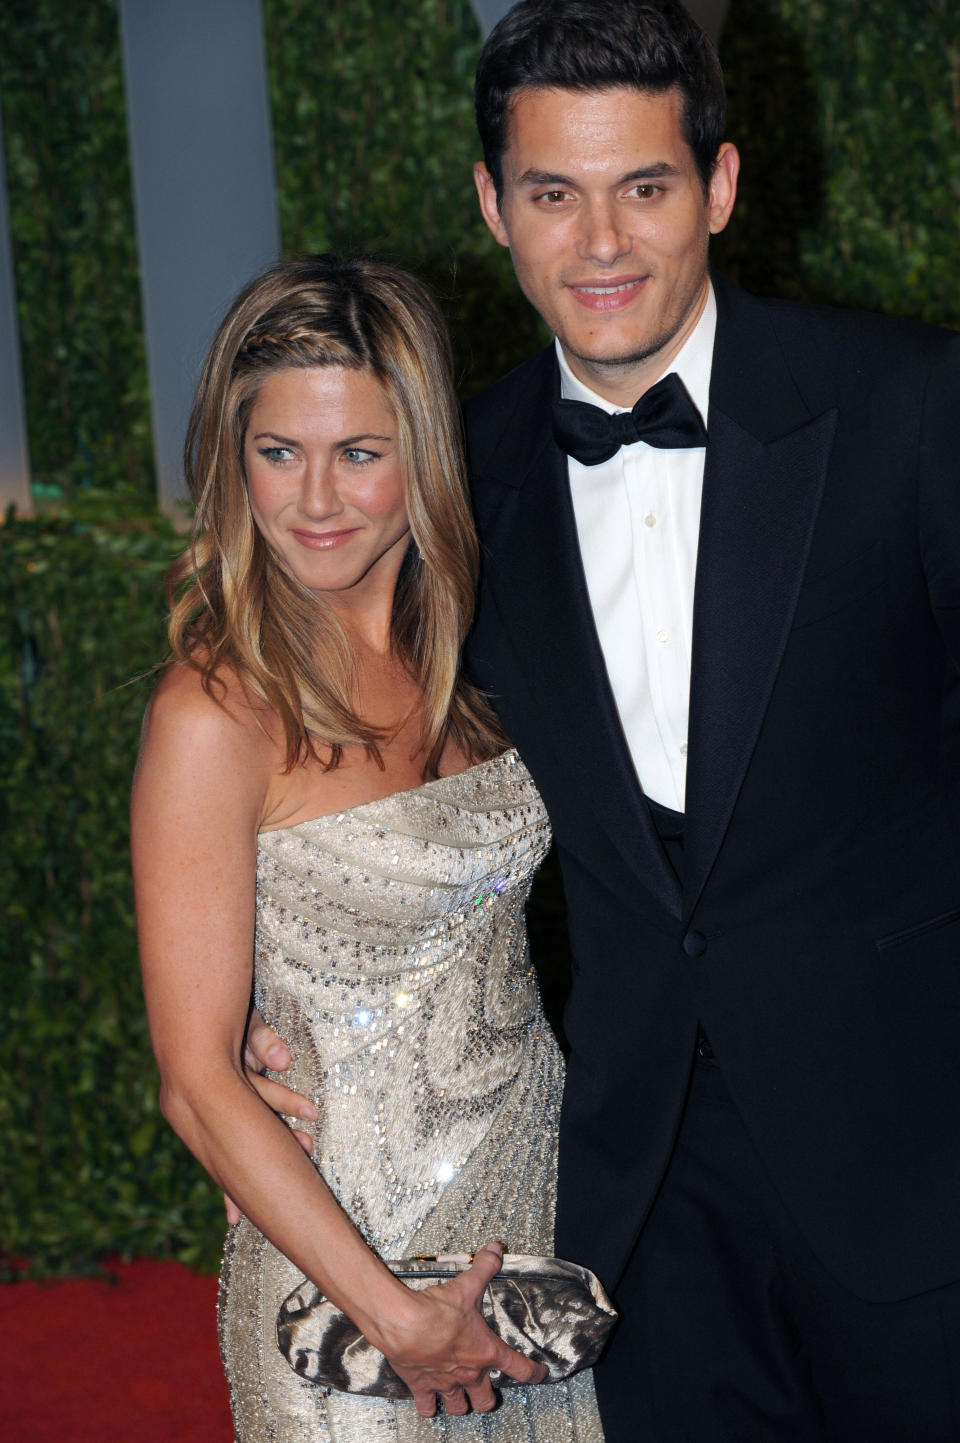 Jennifer Aniston <a href="http://www.people.com/people/article/0,,1112350,00.html">finalized her divorce</a> from Brad Pitt in October 2005 amid reports <a href="http://www.ew.com/ew/article/0,,1066184,00.html">that he had cheated on her</a> with his "Mr. & Mrs. Smith" co-star -- <a href="http://www.cnn.com/2012/04/13/showbiz/pitt-jolie-engaged/index.html" target="_hplink">and current fiancee</a> -- Angelina Jolie.  In April 2008, <a href="http://www.people.com/people/article/0,,20195689,00.html">reports emerged</a> that Aniston was dating John Mayer after they were spotted dining together and holding hands in Miami.      The pair dated <a href="http://www.people.com/people/article/0,,20218834,00.html">on-and-off</a> for a year before <a href="http://www.people.com/people/article/0,,20265151,00.html">calling it quits</a> in March 2009.  In 2010, Mayer <a href="http://www.rollingstone.com/music/news/the-dirty-mind-and-lonely-heart-of-john-mayer-20120606?page=4">spoke to <em>Rolling Stone</em> about the break up</a>.  "I've never really gotten over it," he said in the interview.  "It was one of the worst times of my life."  